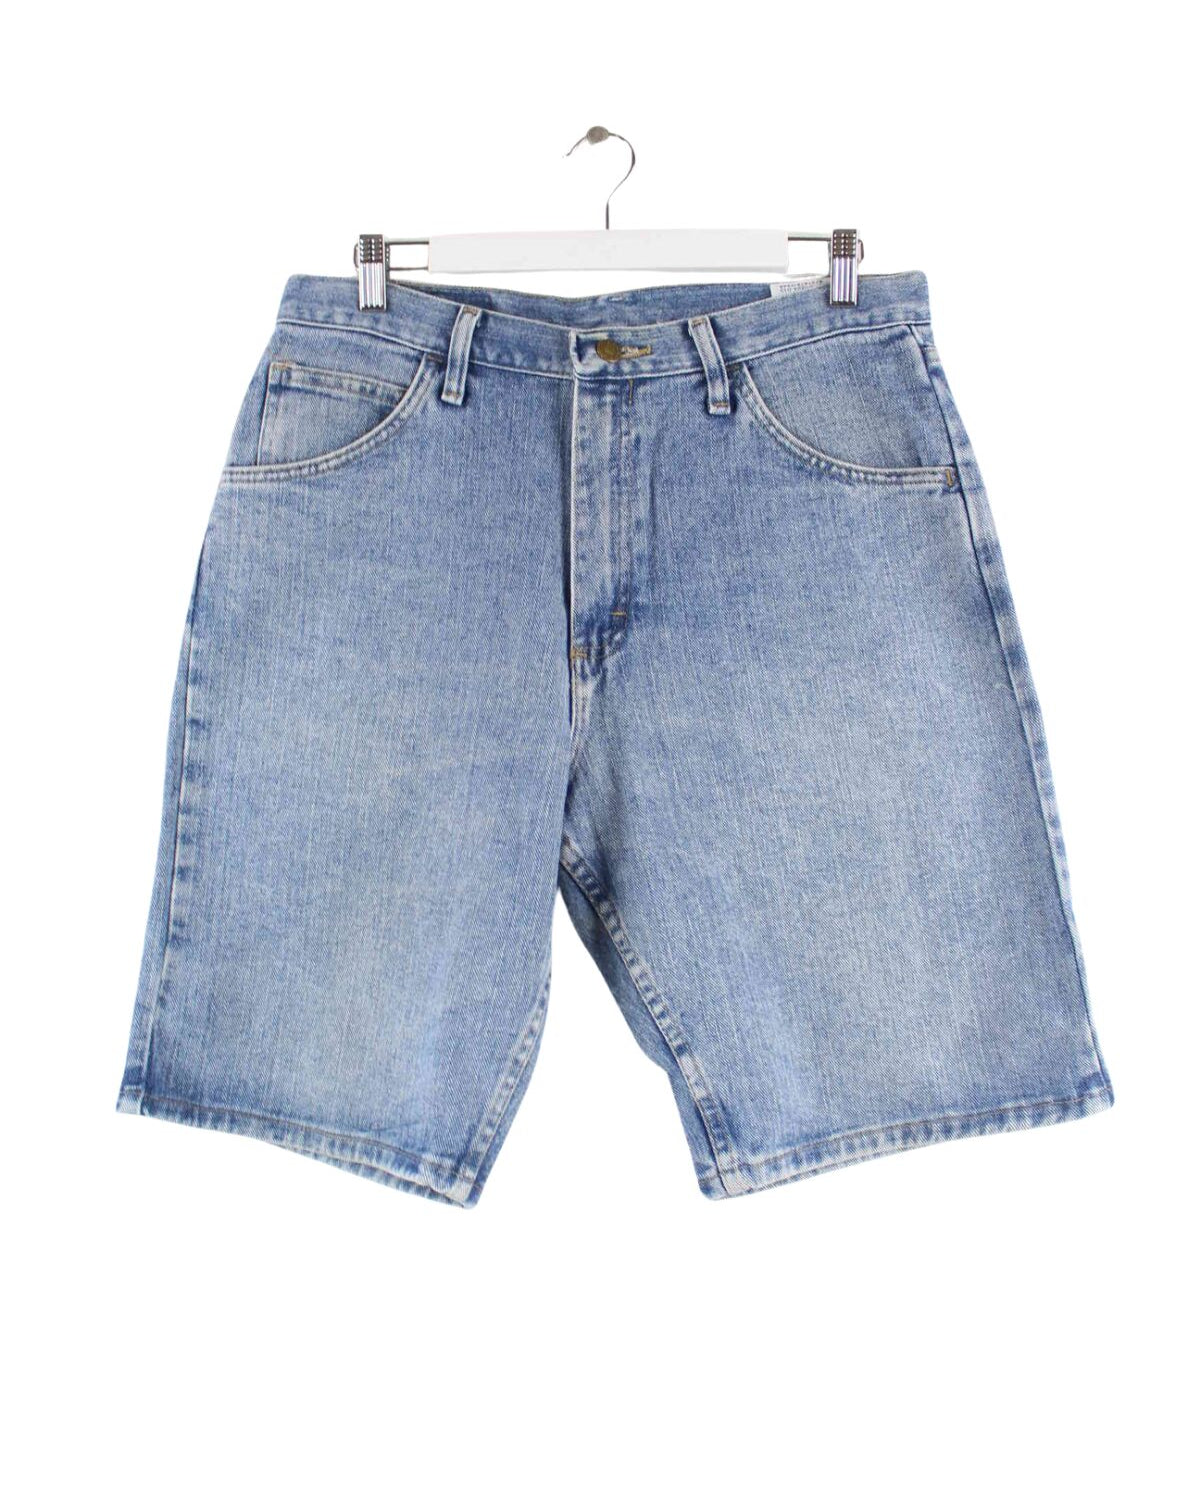 Wrangler Relaxed Fit Jeans Shorts Blau W32 (front image)